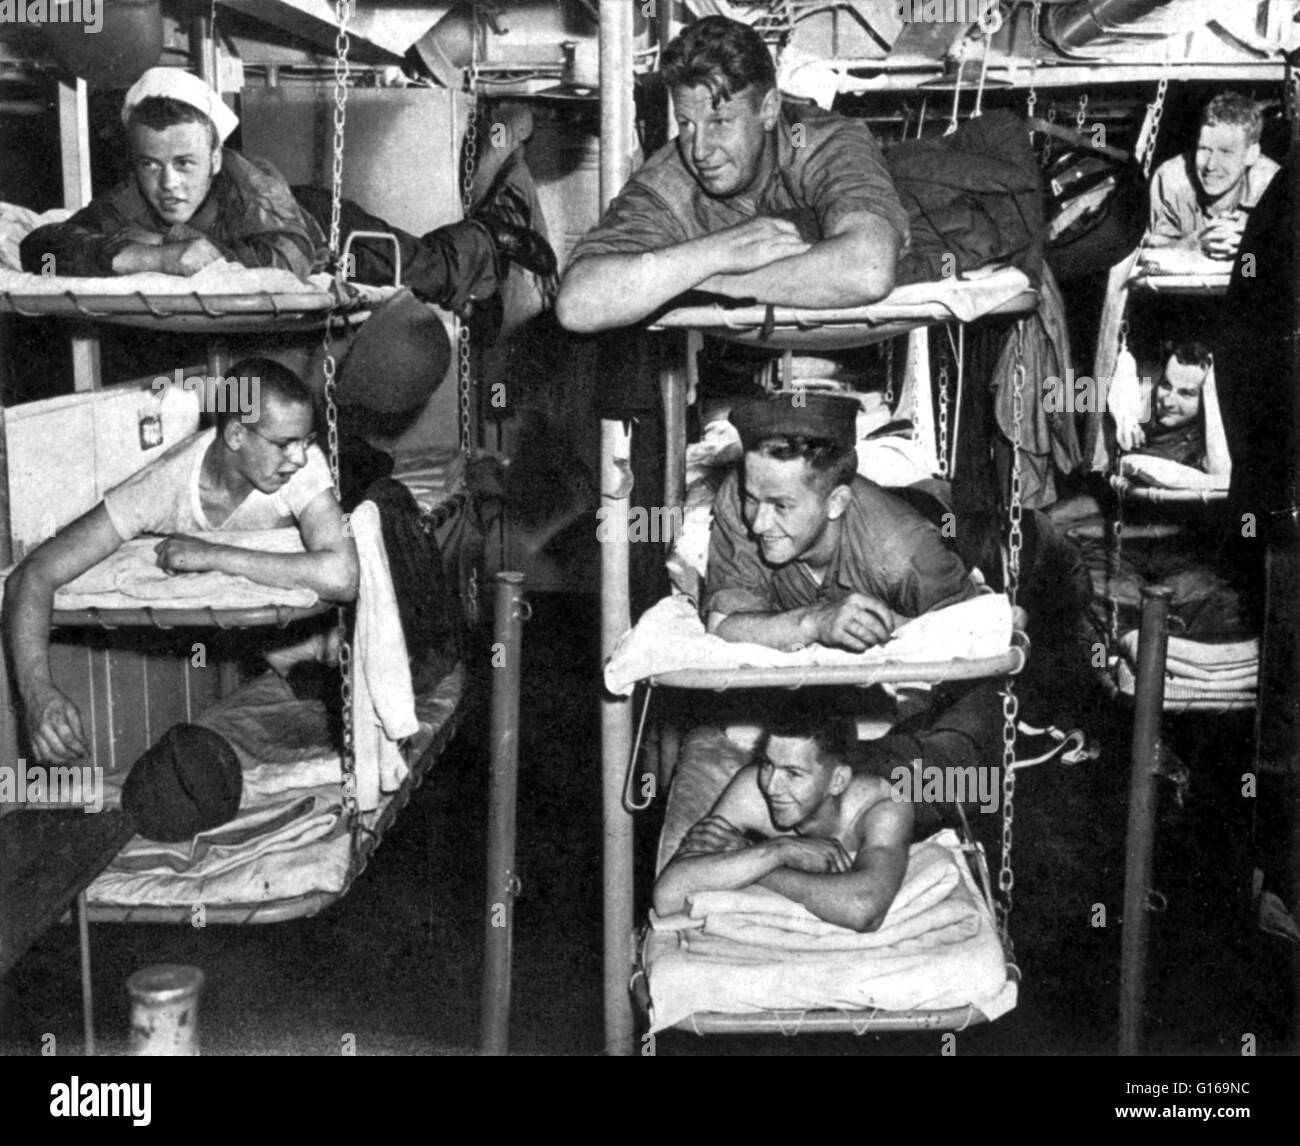 Sailors 'at home' in crew quarters of ship bound for North Africa on the way to invade Sicily during World War II, July 1943. Triple deck bunks fold up during daytime to make room for mess tables and recreation. Soldiers live in narrow compartments on eit Stock Photo